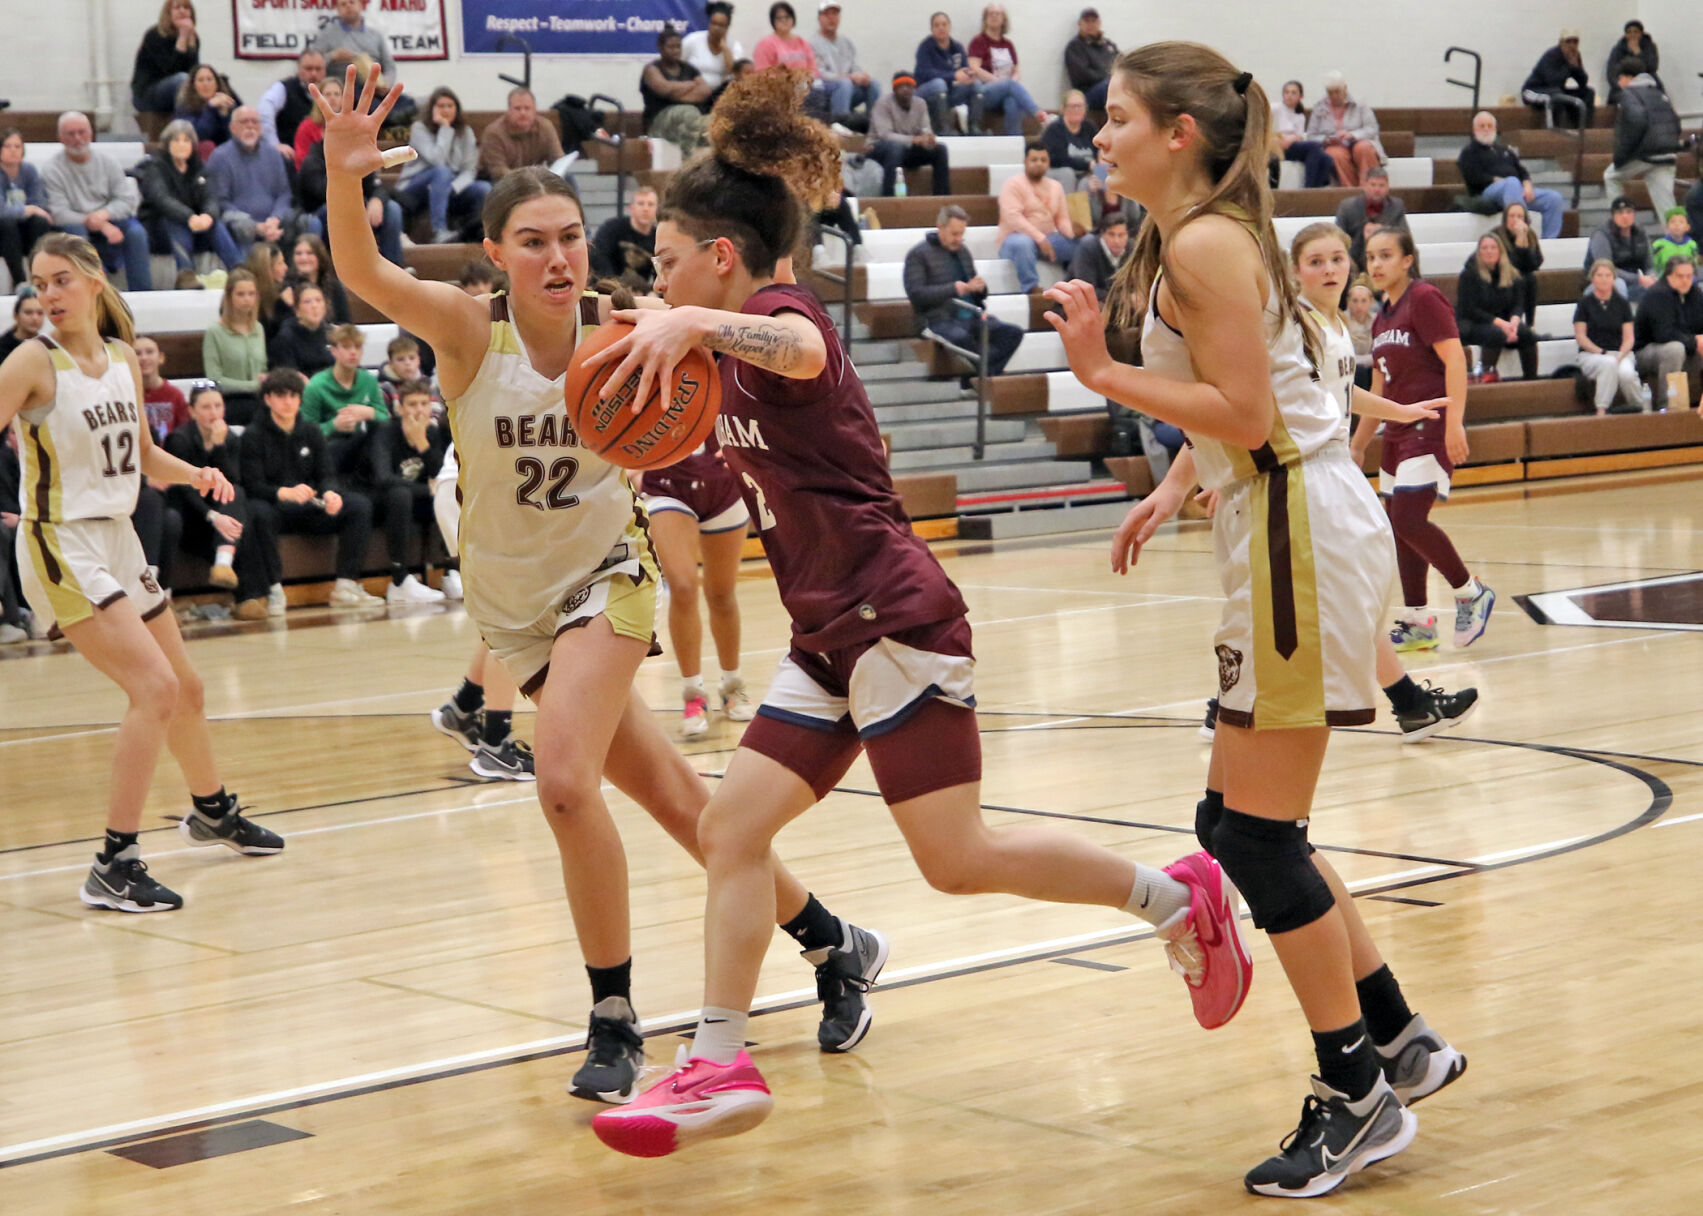 Stonington’s Victory over Windham: A Triumph Marked by Standout Performances and a Game-Changing Winning Streak